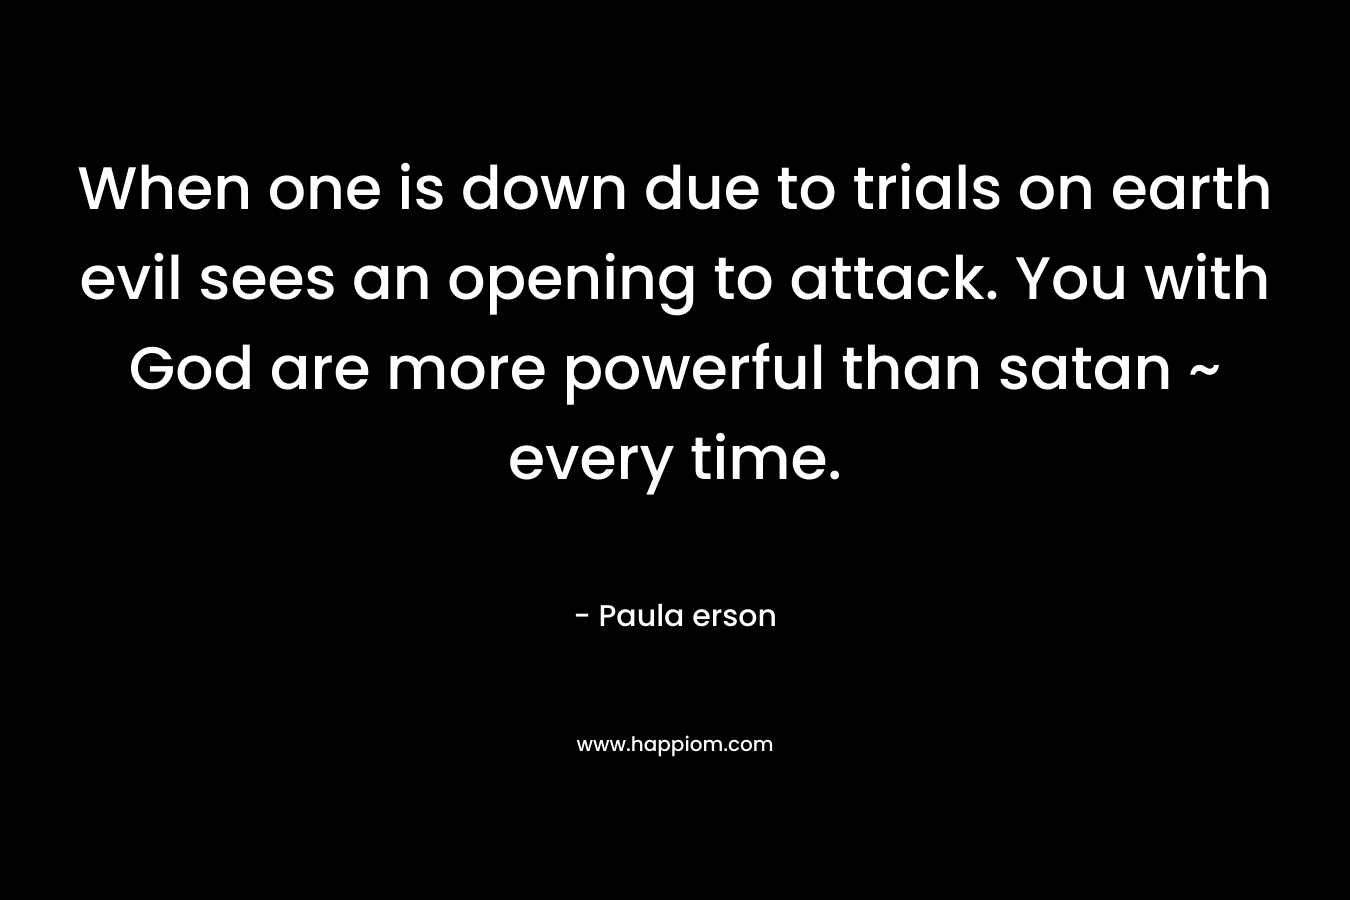 When one is down due to trials on earth evil sees an opening to attack. You with God are more powerful than satan ~ every time. – Paula erson